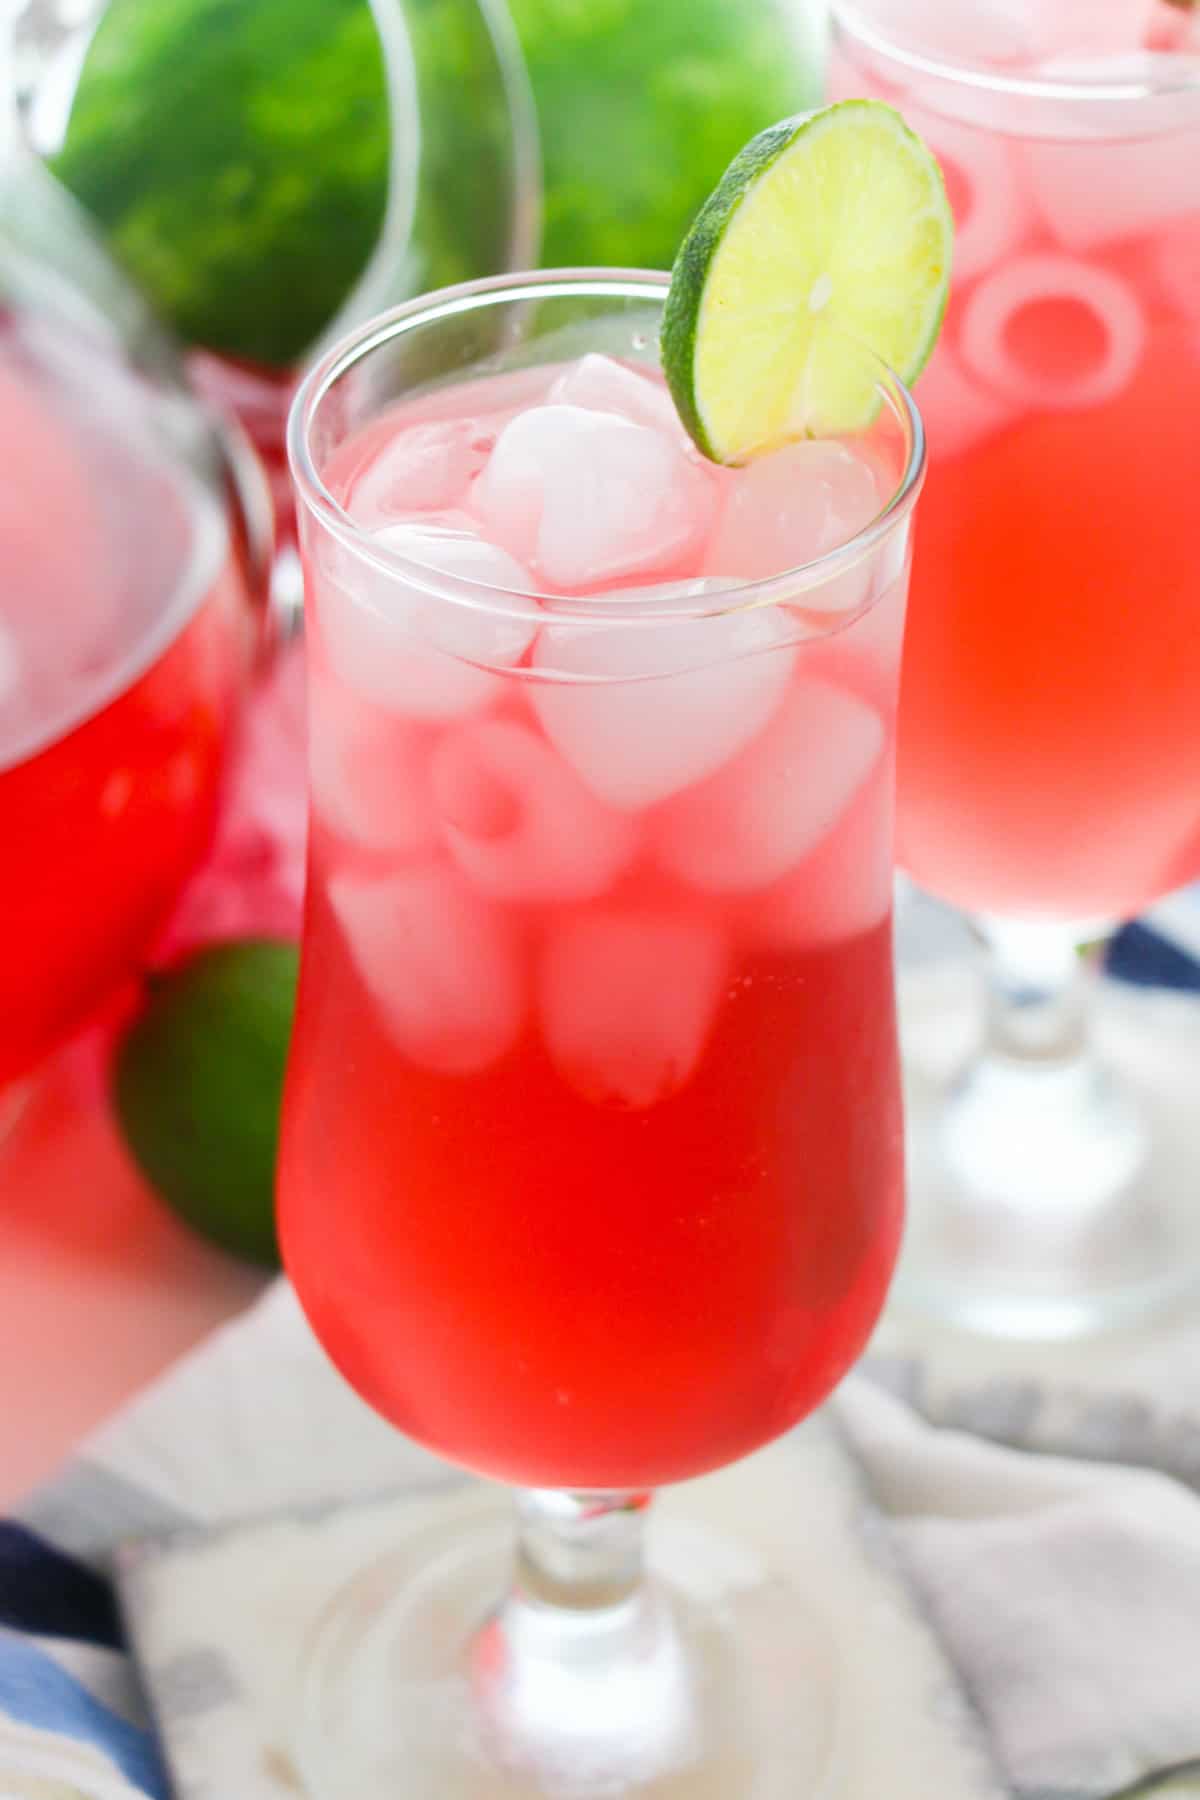 Watermelon refresher drink in glass with ice and lime wheel garnish. A pitcher and another glass of the drink are in background,